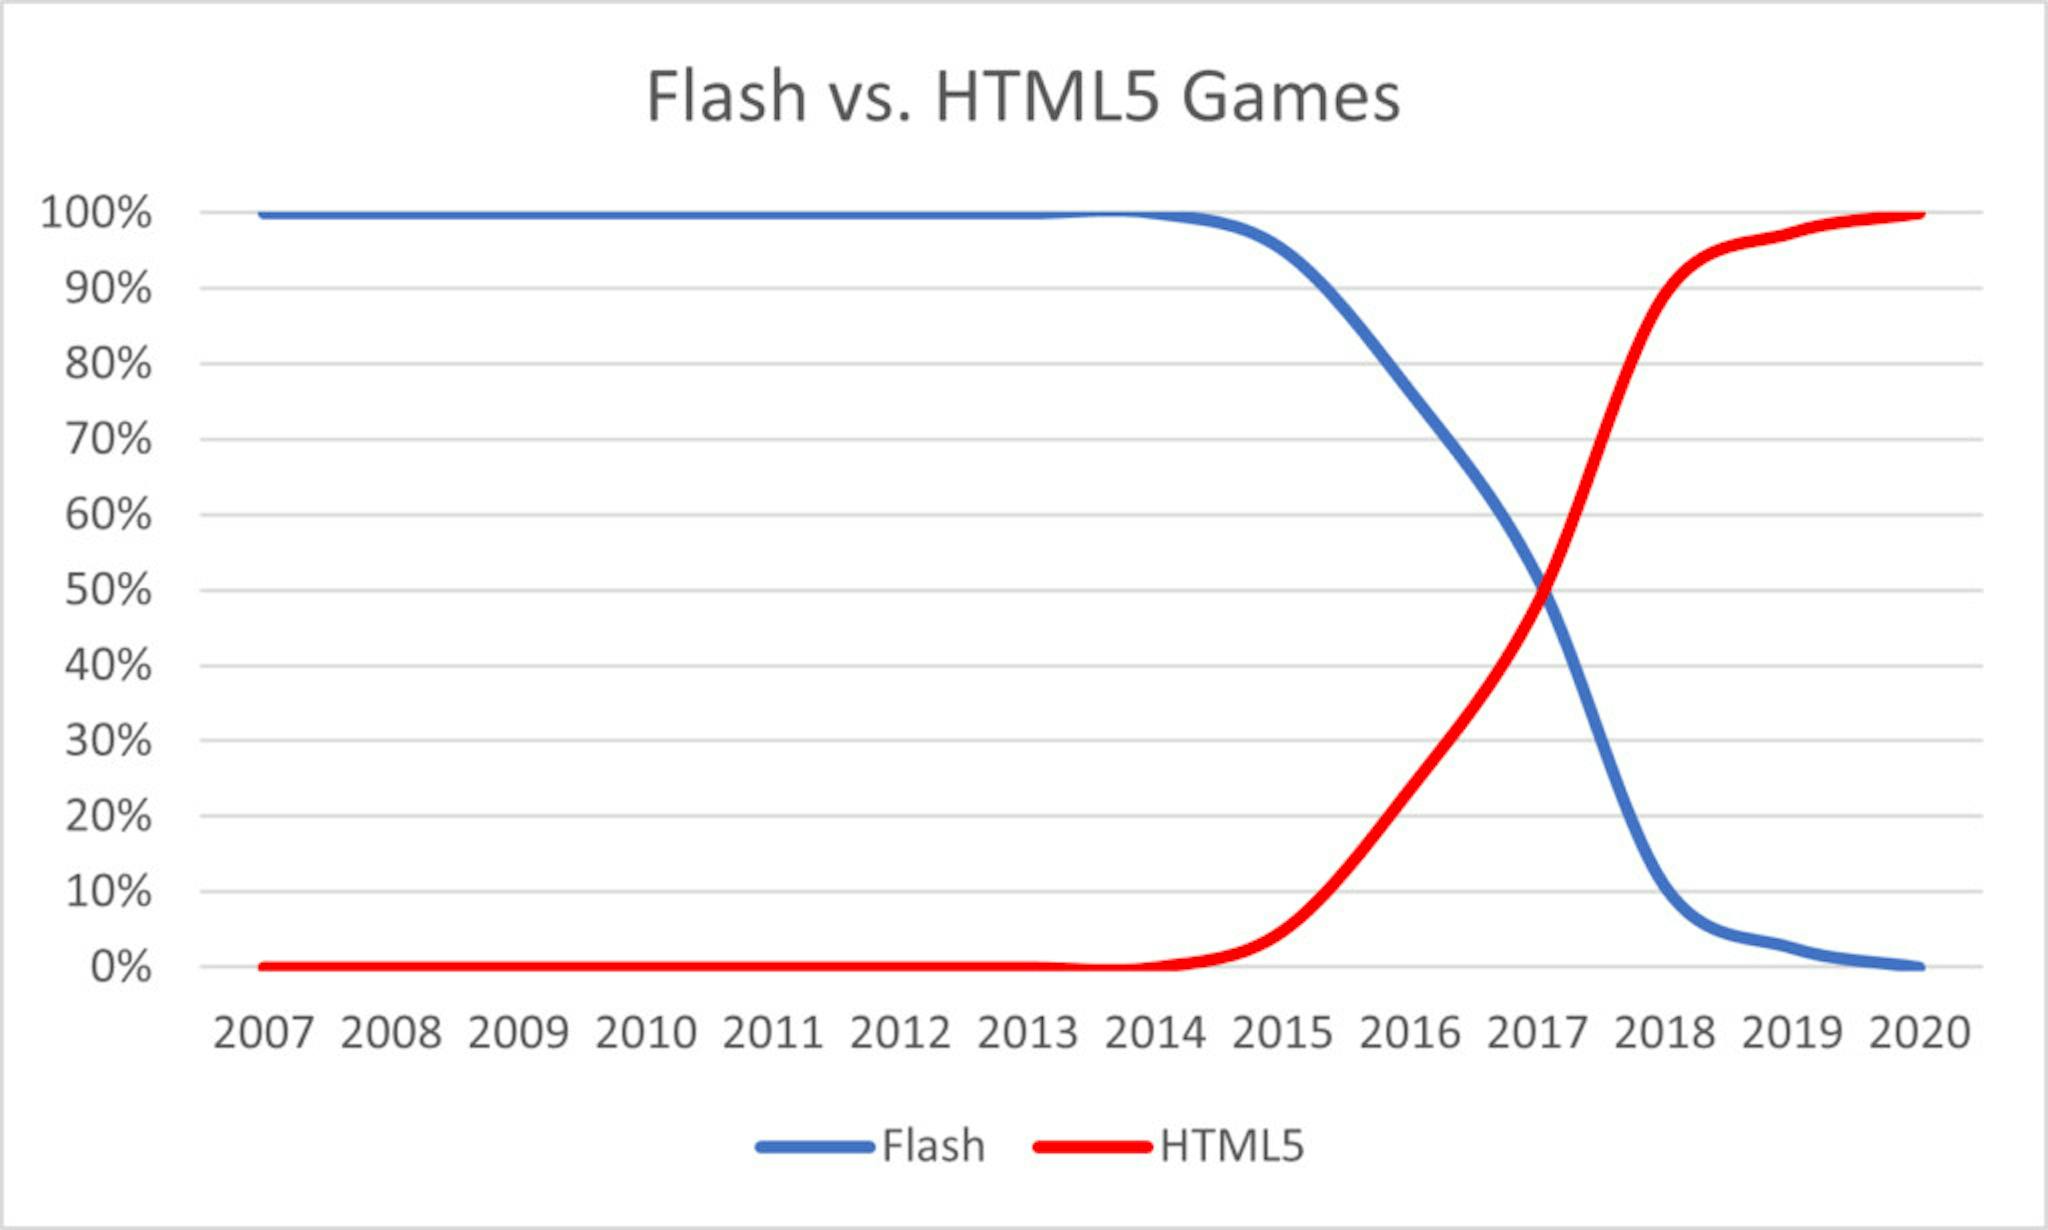 Flash and HTML5 games on the Armor Games website 